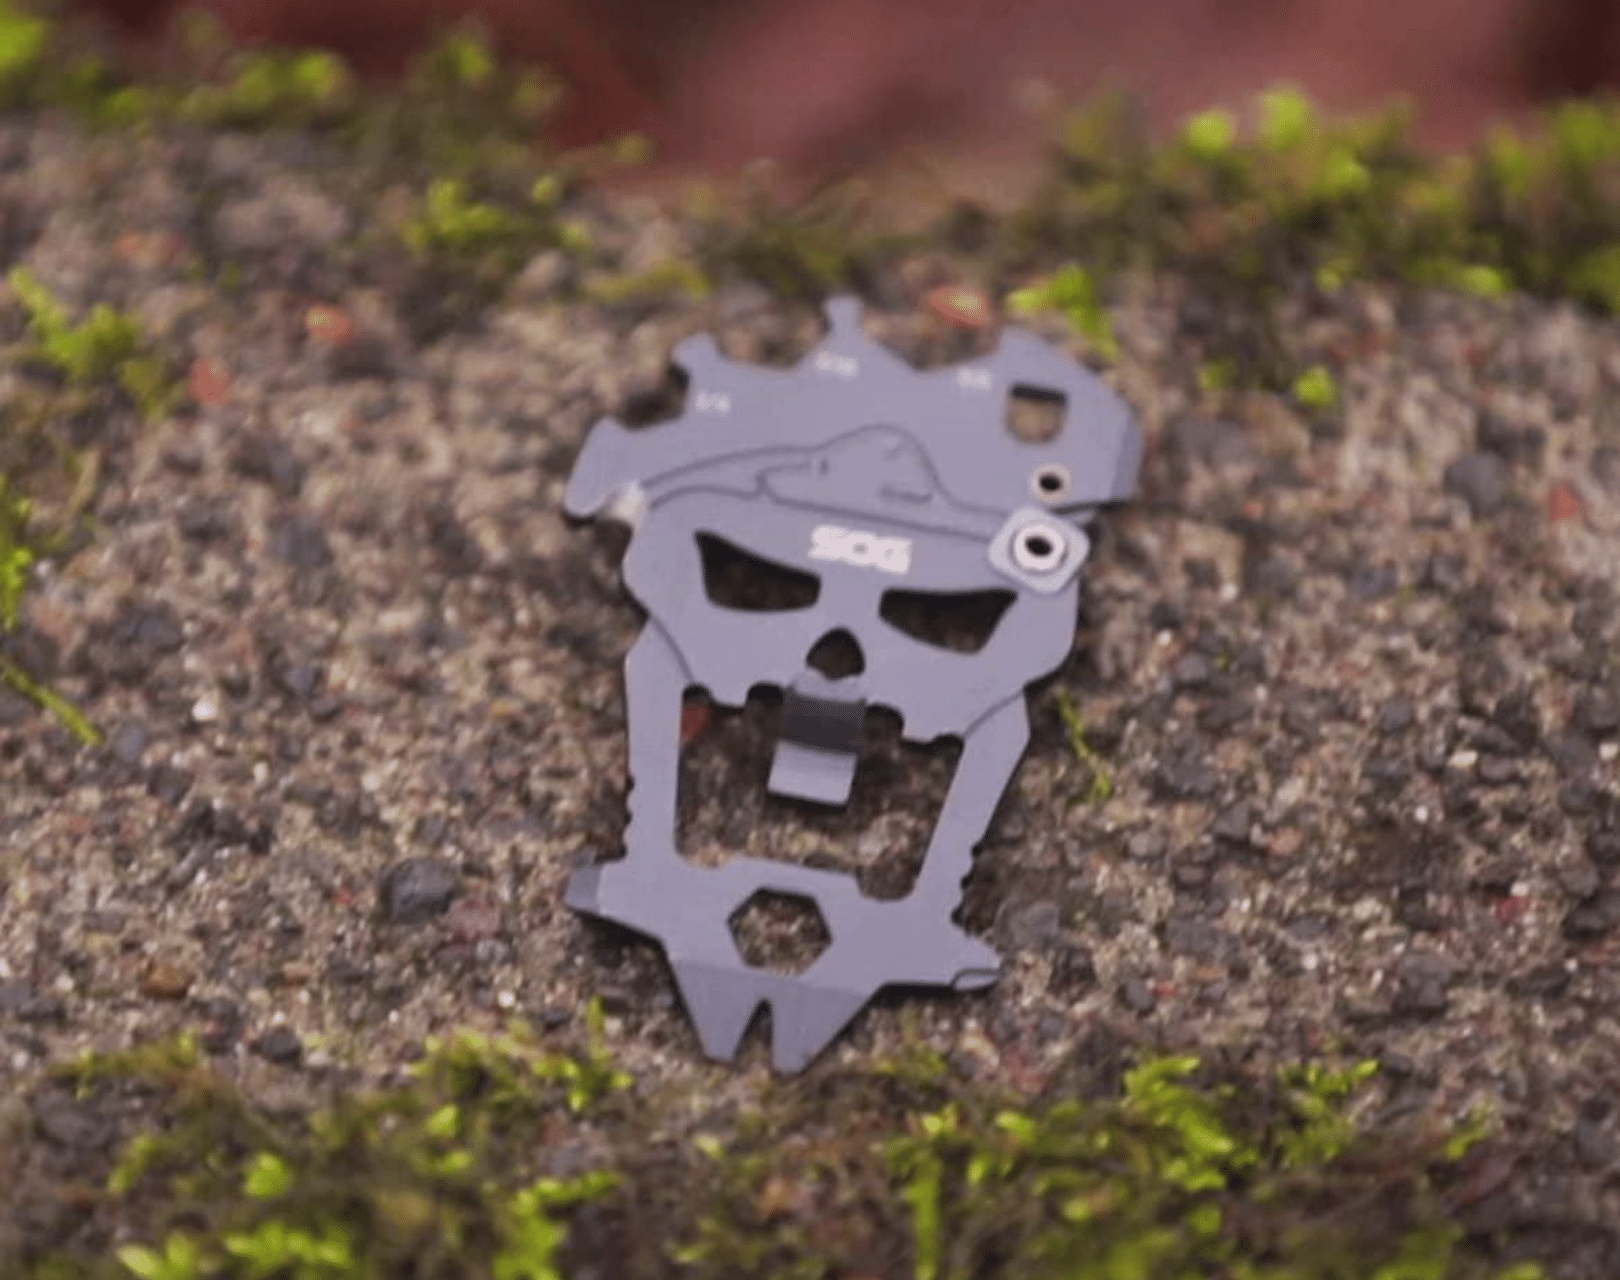 A SOG keychain multi-tool laying on a mossy rock